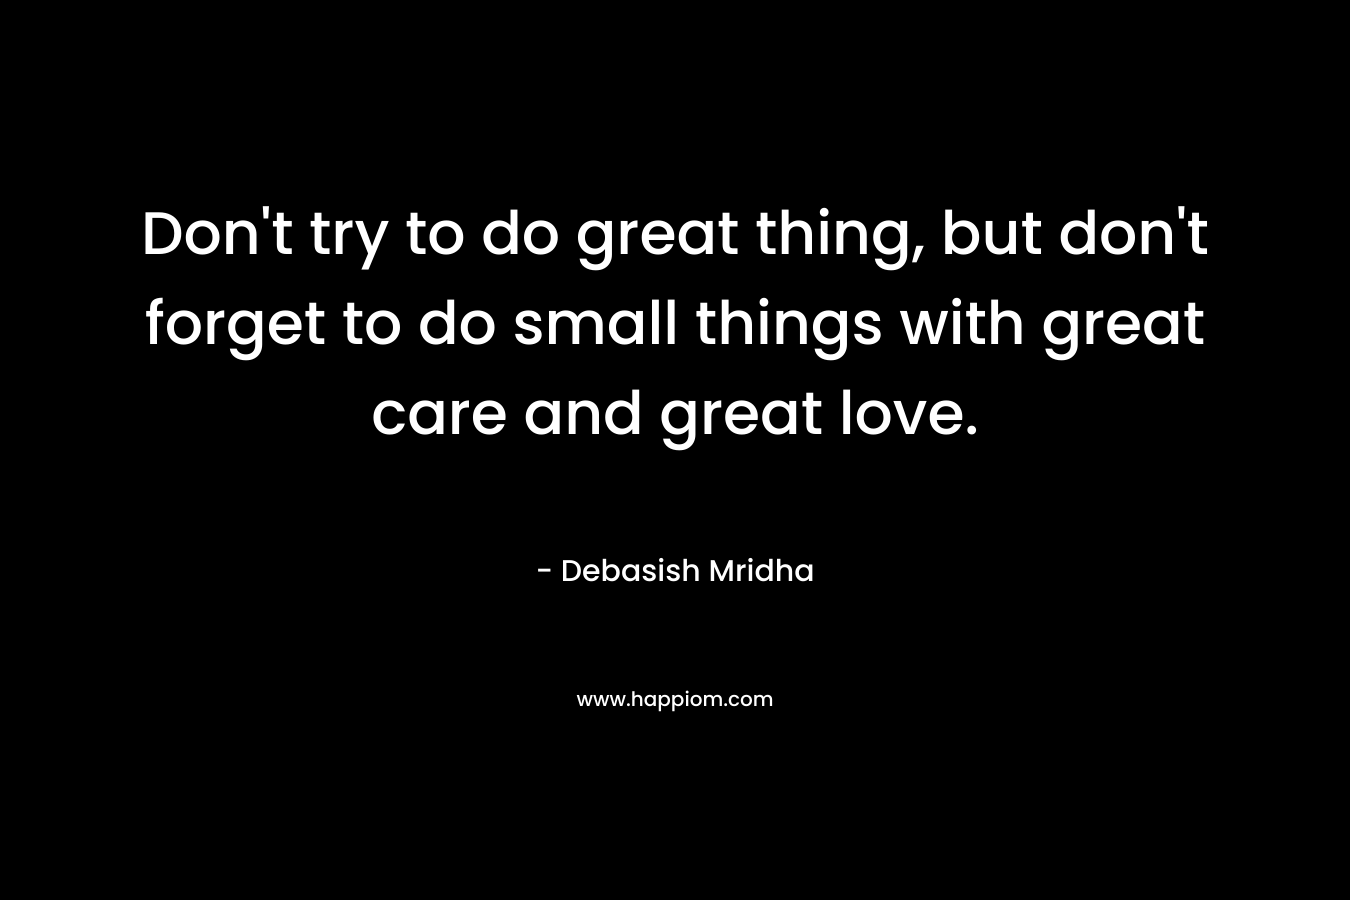 Don't try to do great thing, but don't forget to do small things with great care and great love.